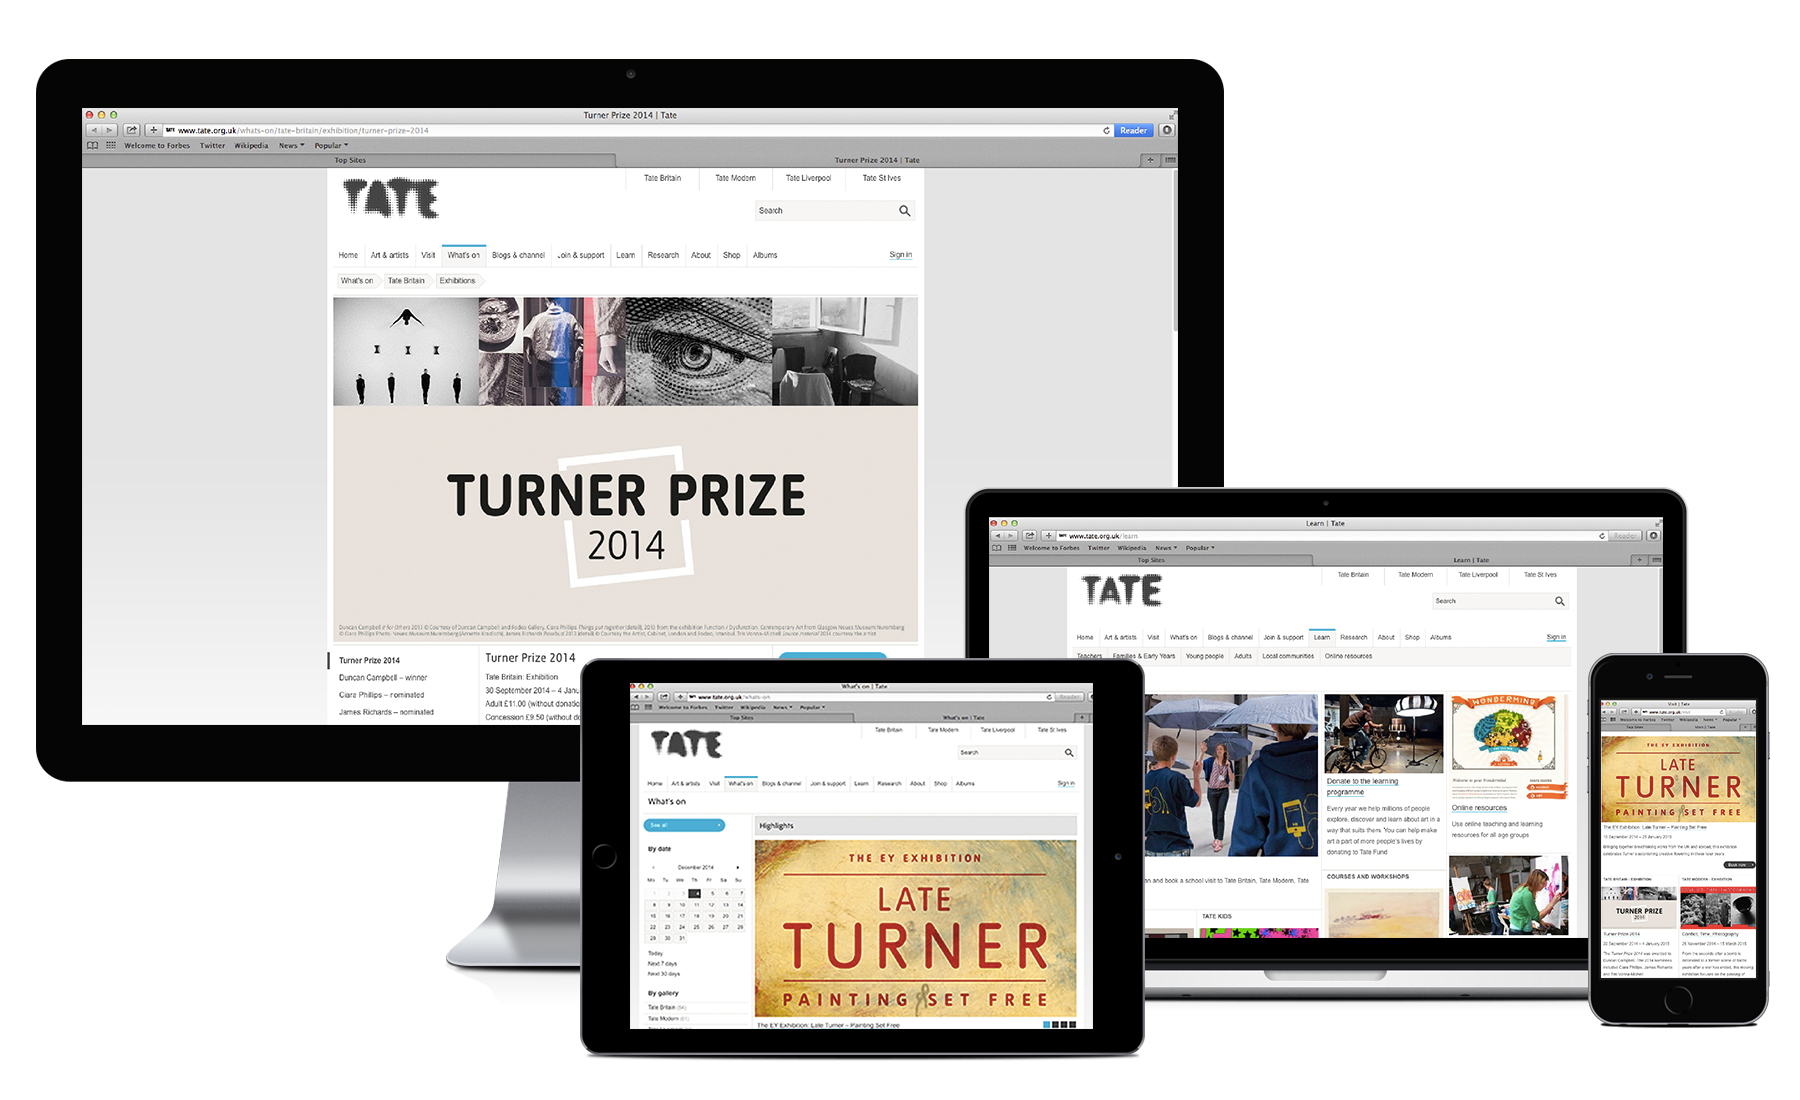 Desktop, Macbook, tablet, iPhone showing pages from the Tate Museums website 